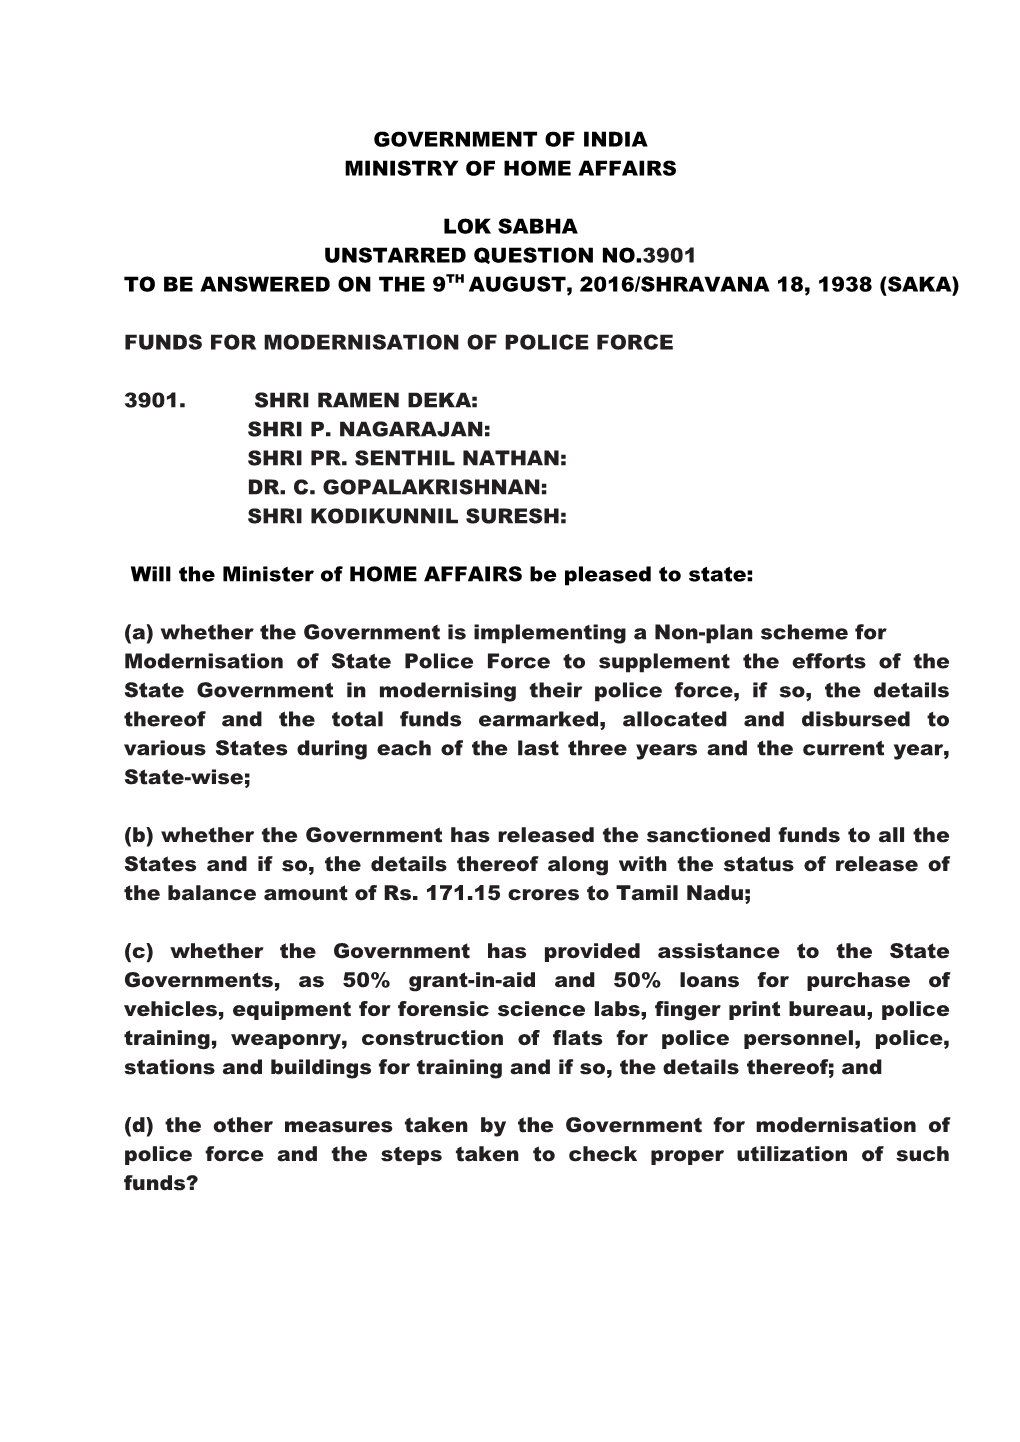 Government of India Ministry of Home Affairs Lok Sabha Unstarred Question No.3901 to Be Answered on the 9Th August, 2016/Shravan